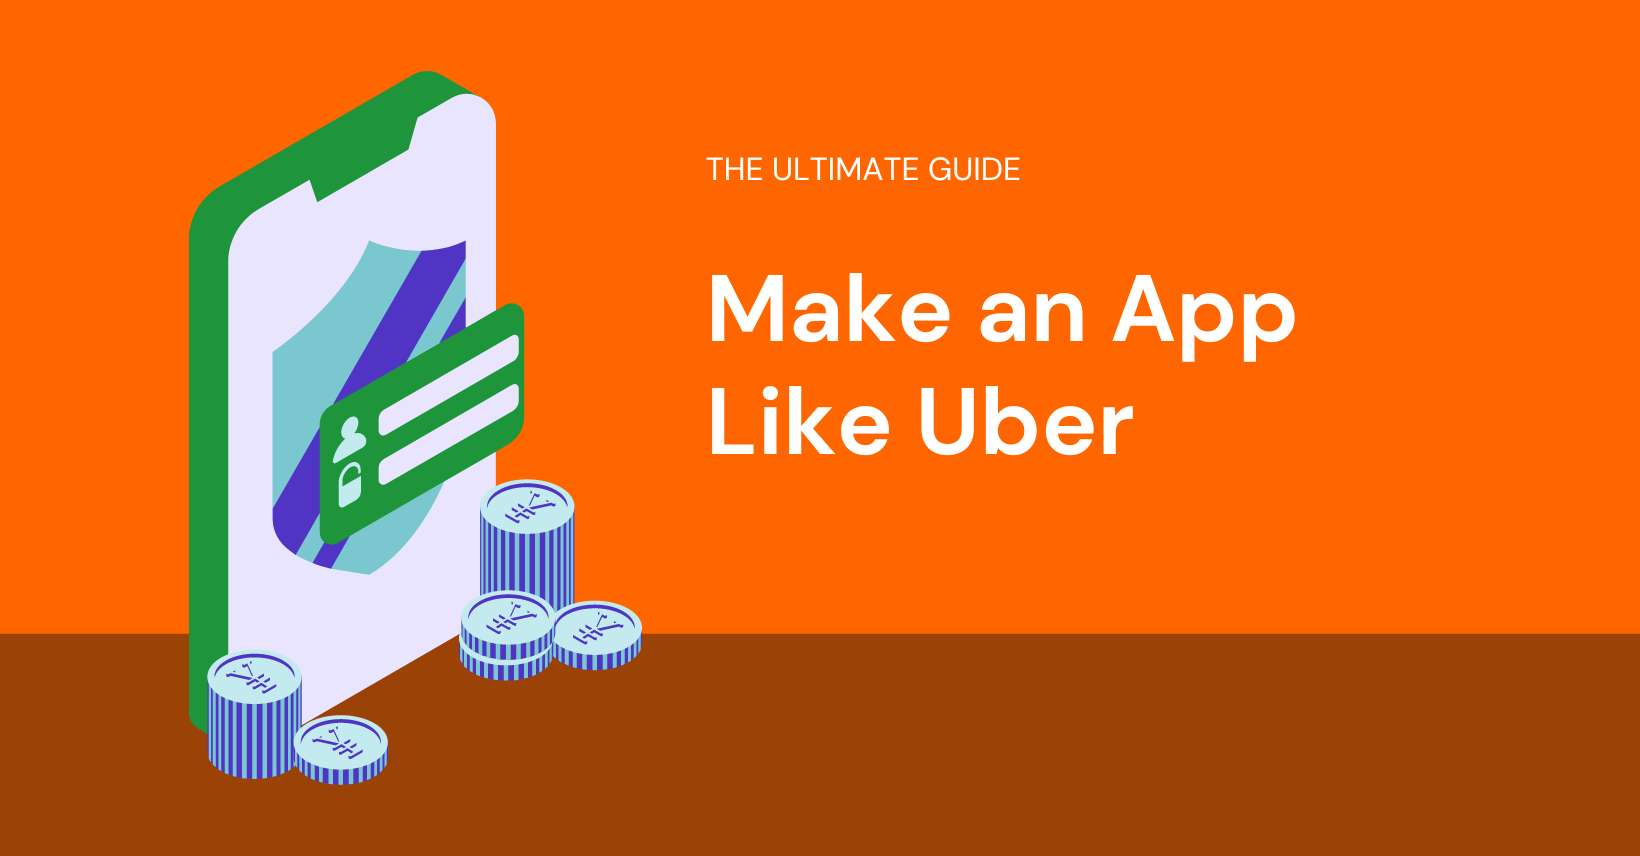 How to Make an App Like Uber: The Ultimate Guide